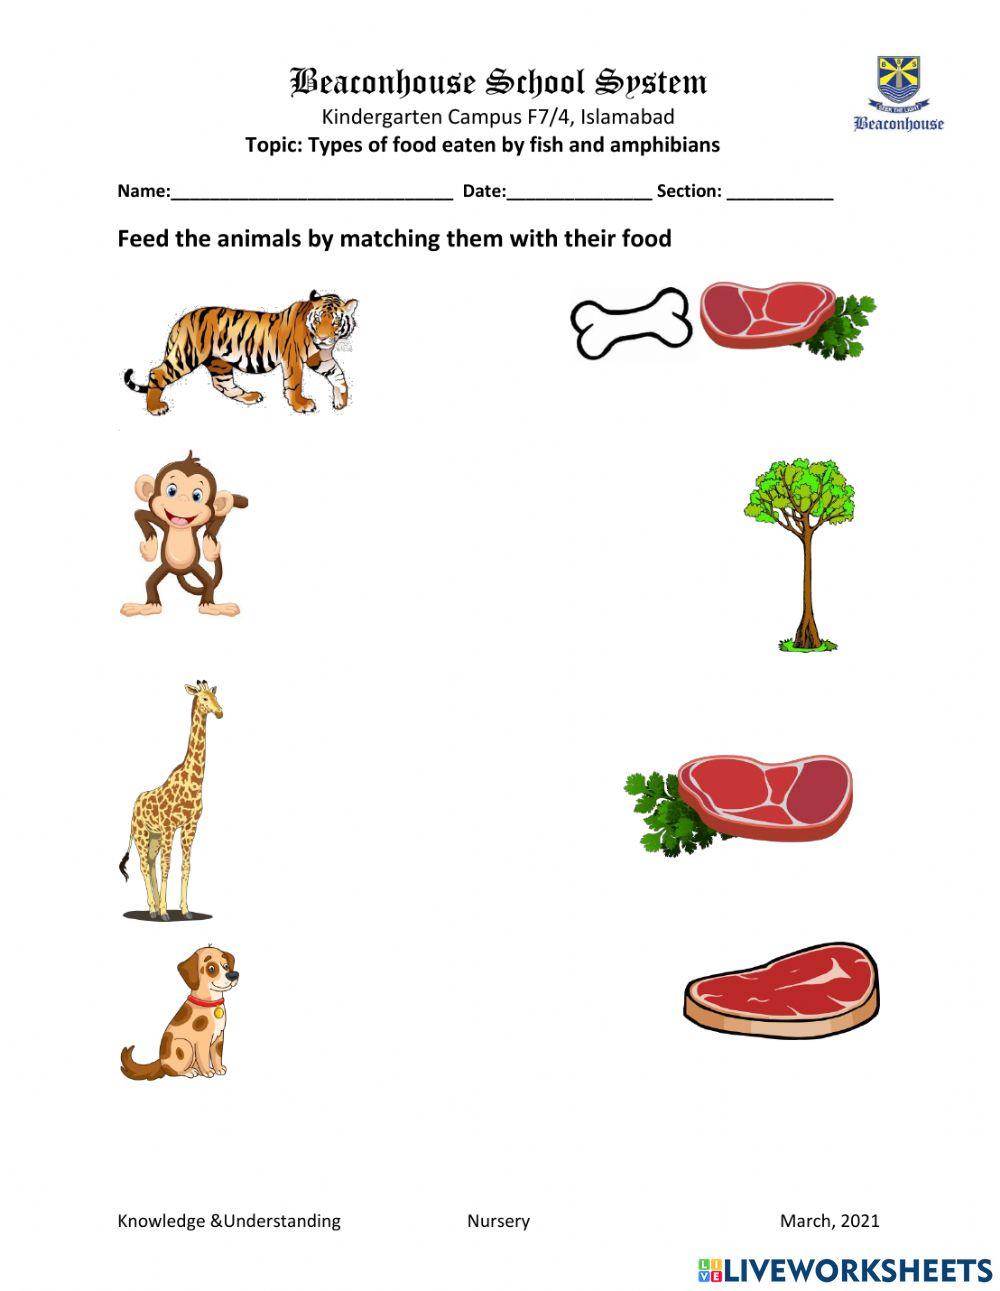 Type of food eaten by Mammals